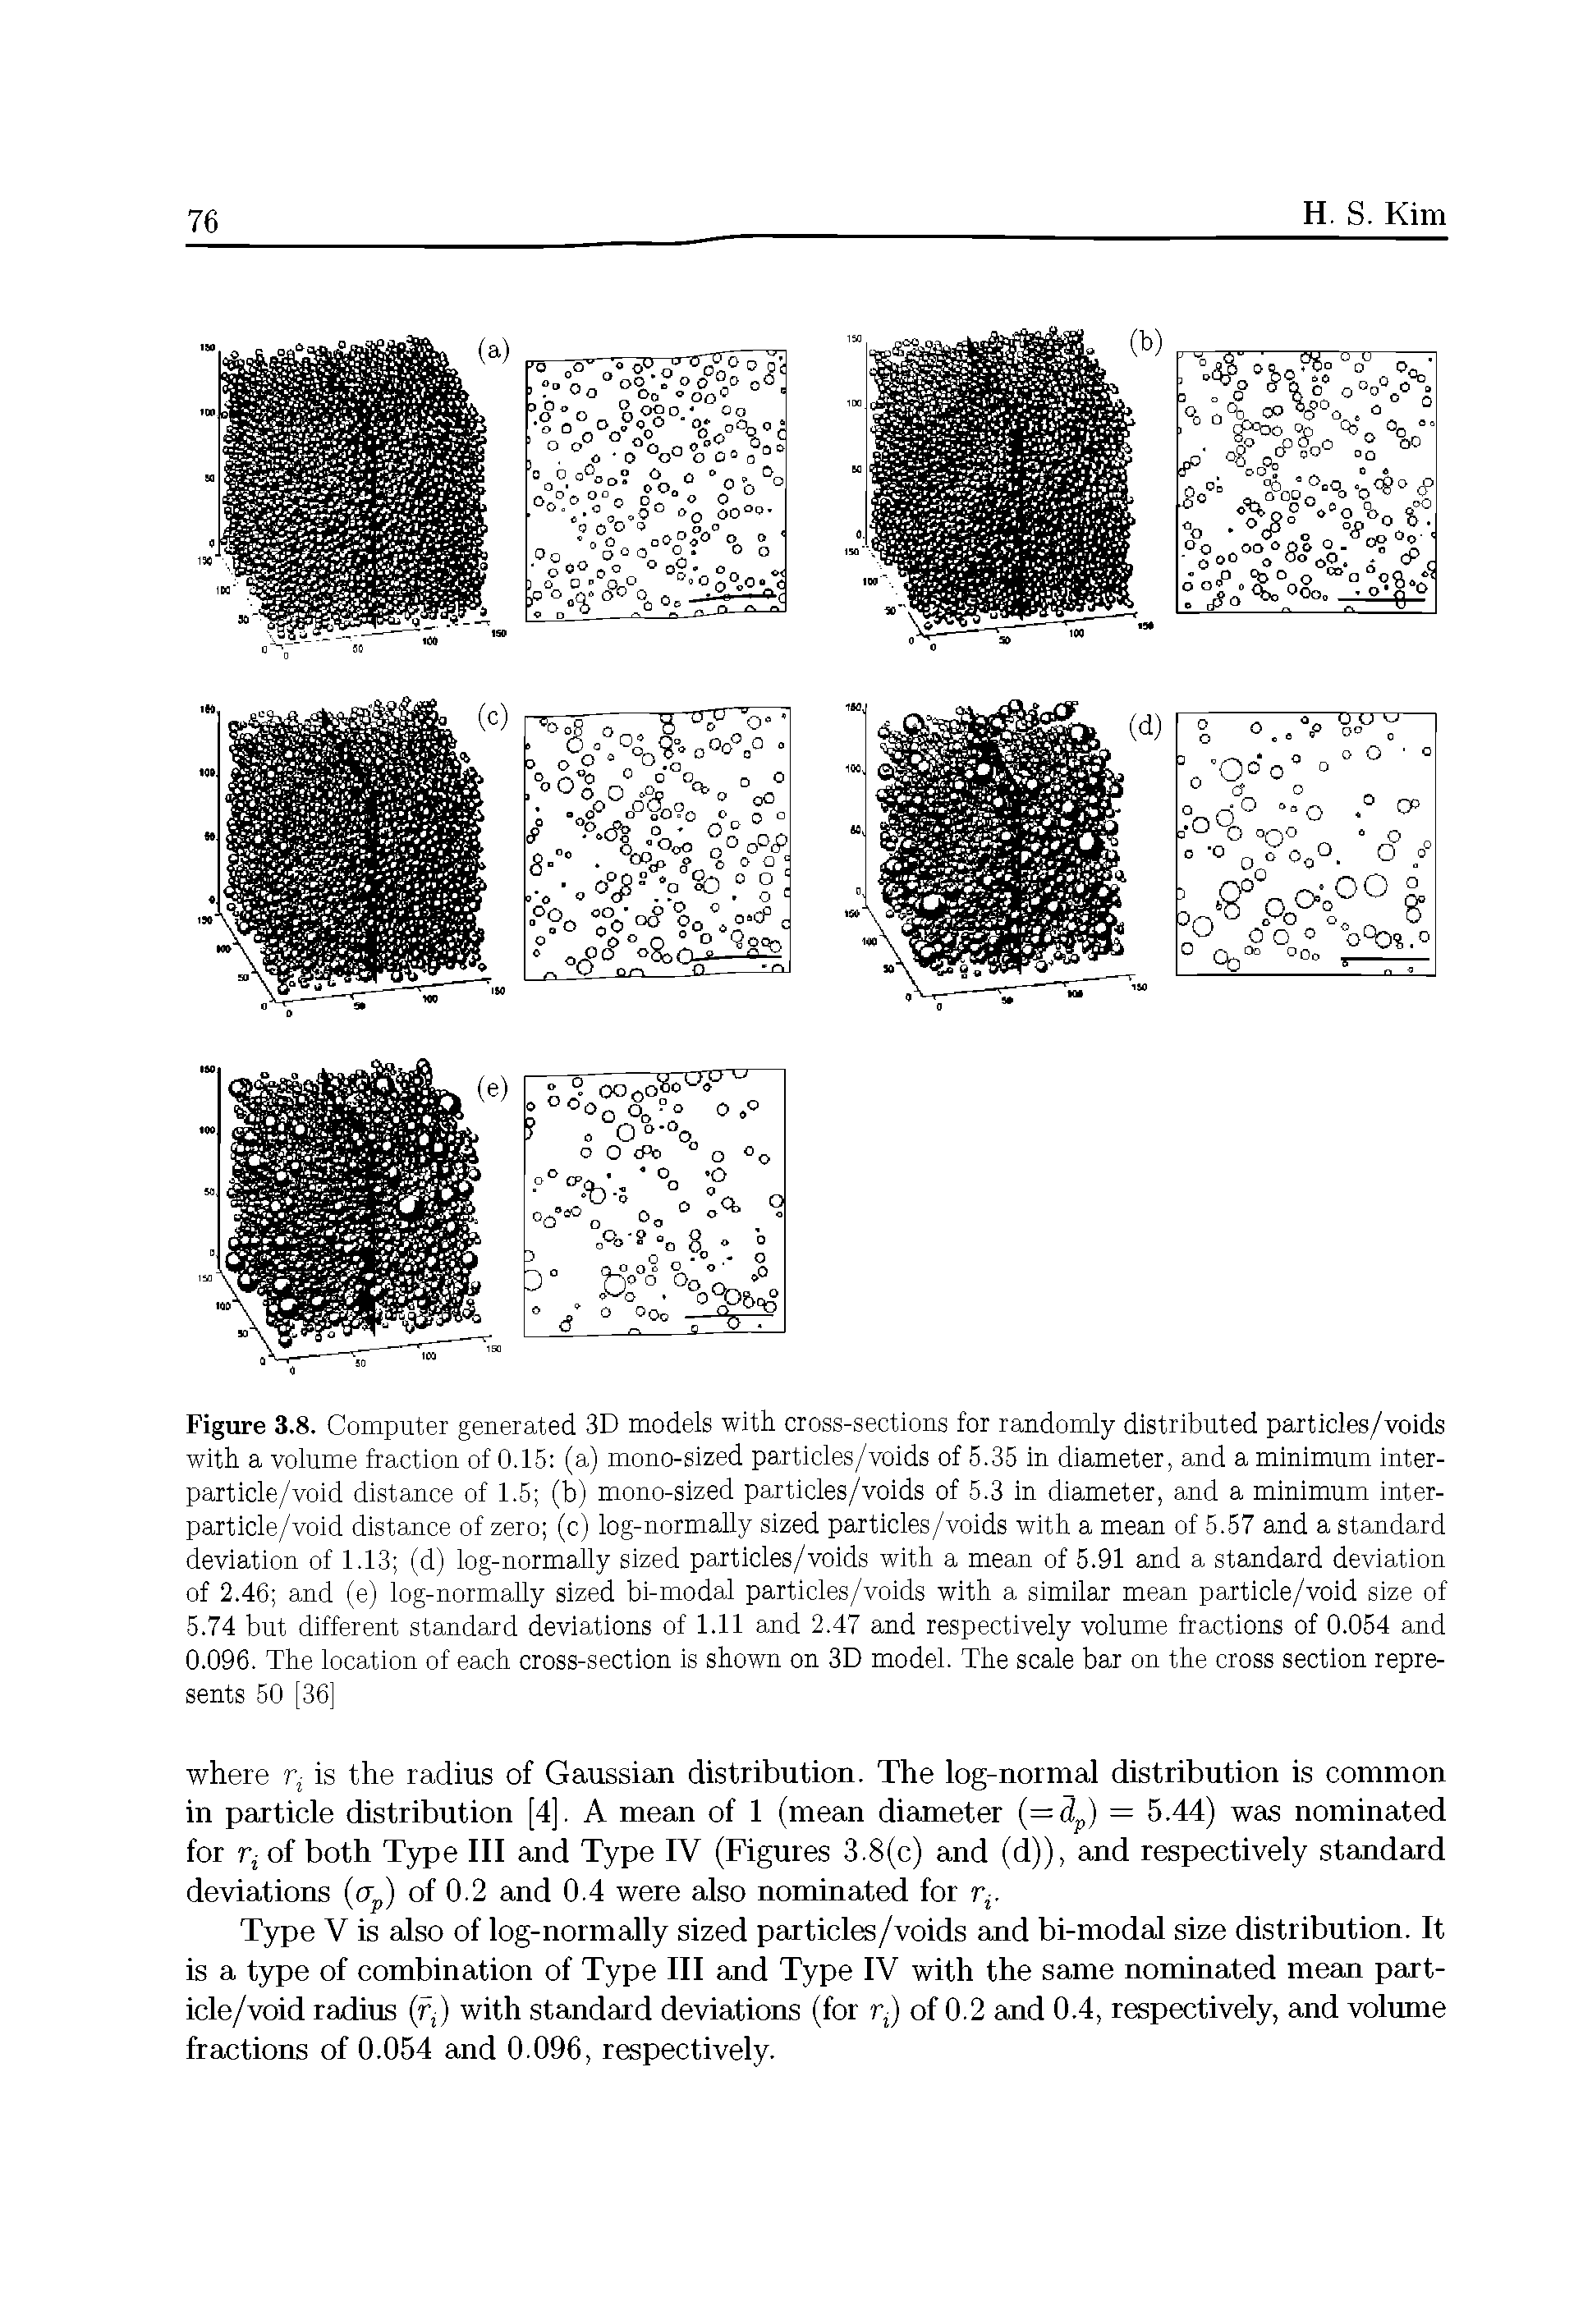 Figure 3.8. Computer generated 3D models with cross-sections for randomly distributed particles/voids with a volume fraction of 0.15 (a) mono-sized particles/voids of 5.35 in diameter, and a minimum inter-particle/void distance of 1.5 (b) mono-sized particles/voids of 5.3 in diameter, and a minimum inter-particle/void distance of zero (c) log-normally sized particles/voids with a mean of 5.57 and a standard deviation of 1.13 (d) log-normaUy sized particles/voids with a mean of 5.91 and a standard deviation of 2.46 and (e) log-normally sized bi-modal particles/voids with a similar mean particle/void size of 5.74 but different standard deviations of 1.11 and 2.47 and respectively volume fractions of 0.054 and 0.096. The location of each cross-section is shown on 3D model. The scale bar on the cross section represents 50 [361...